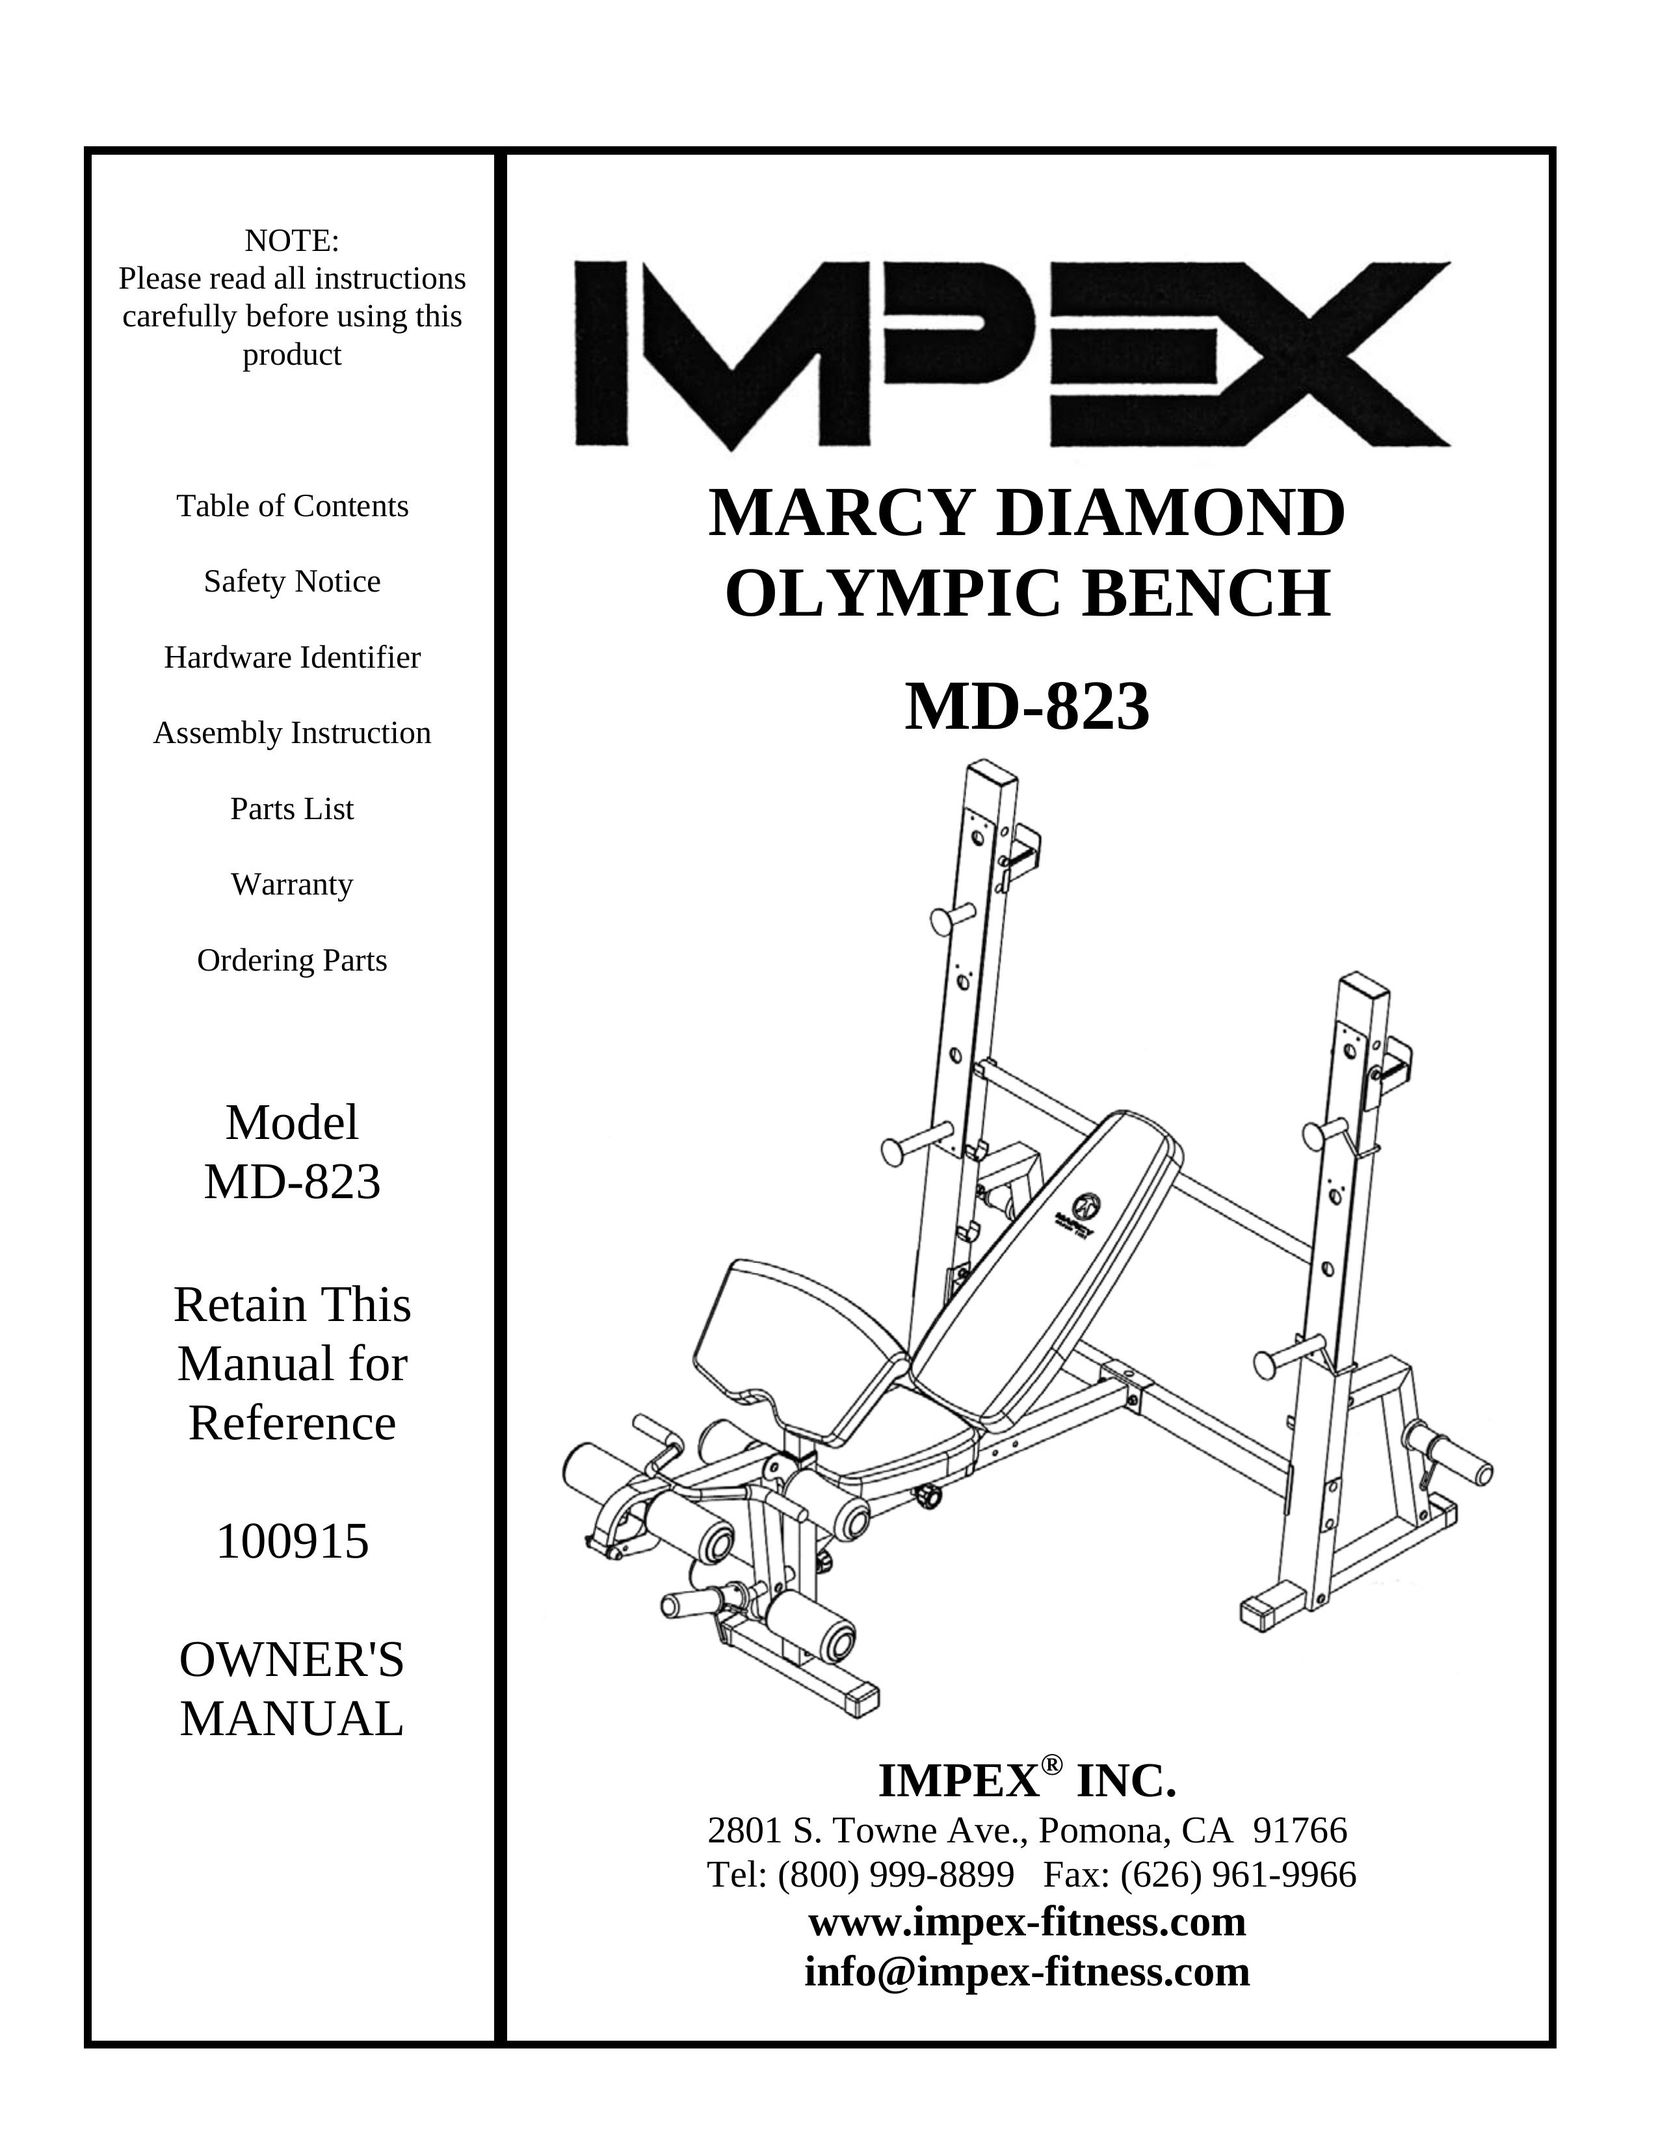 Impex MD-823 Fitness Equipment User Manual